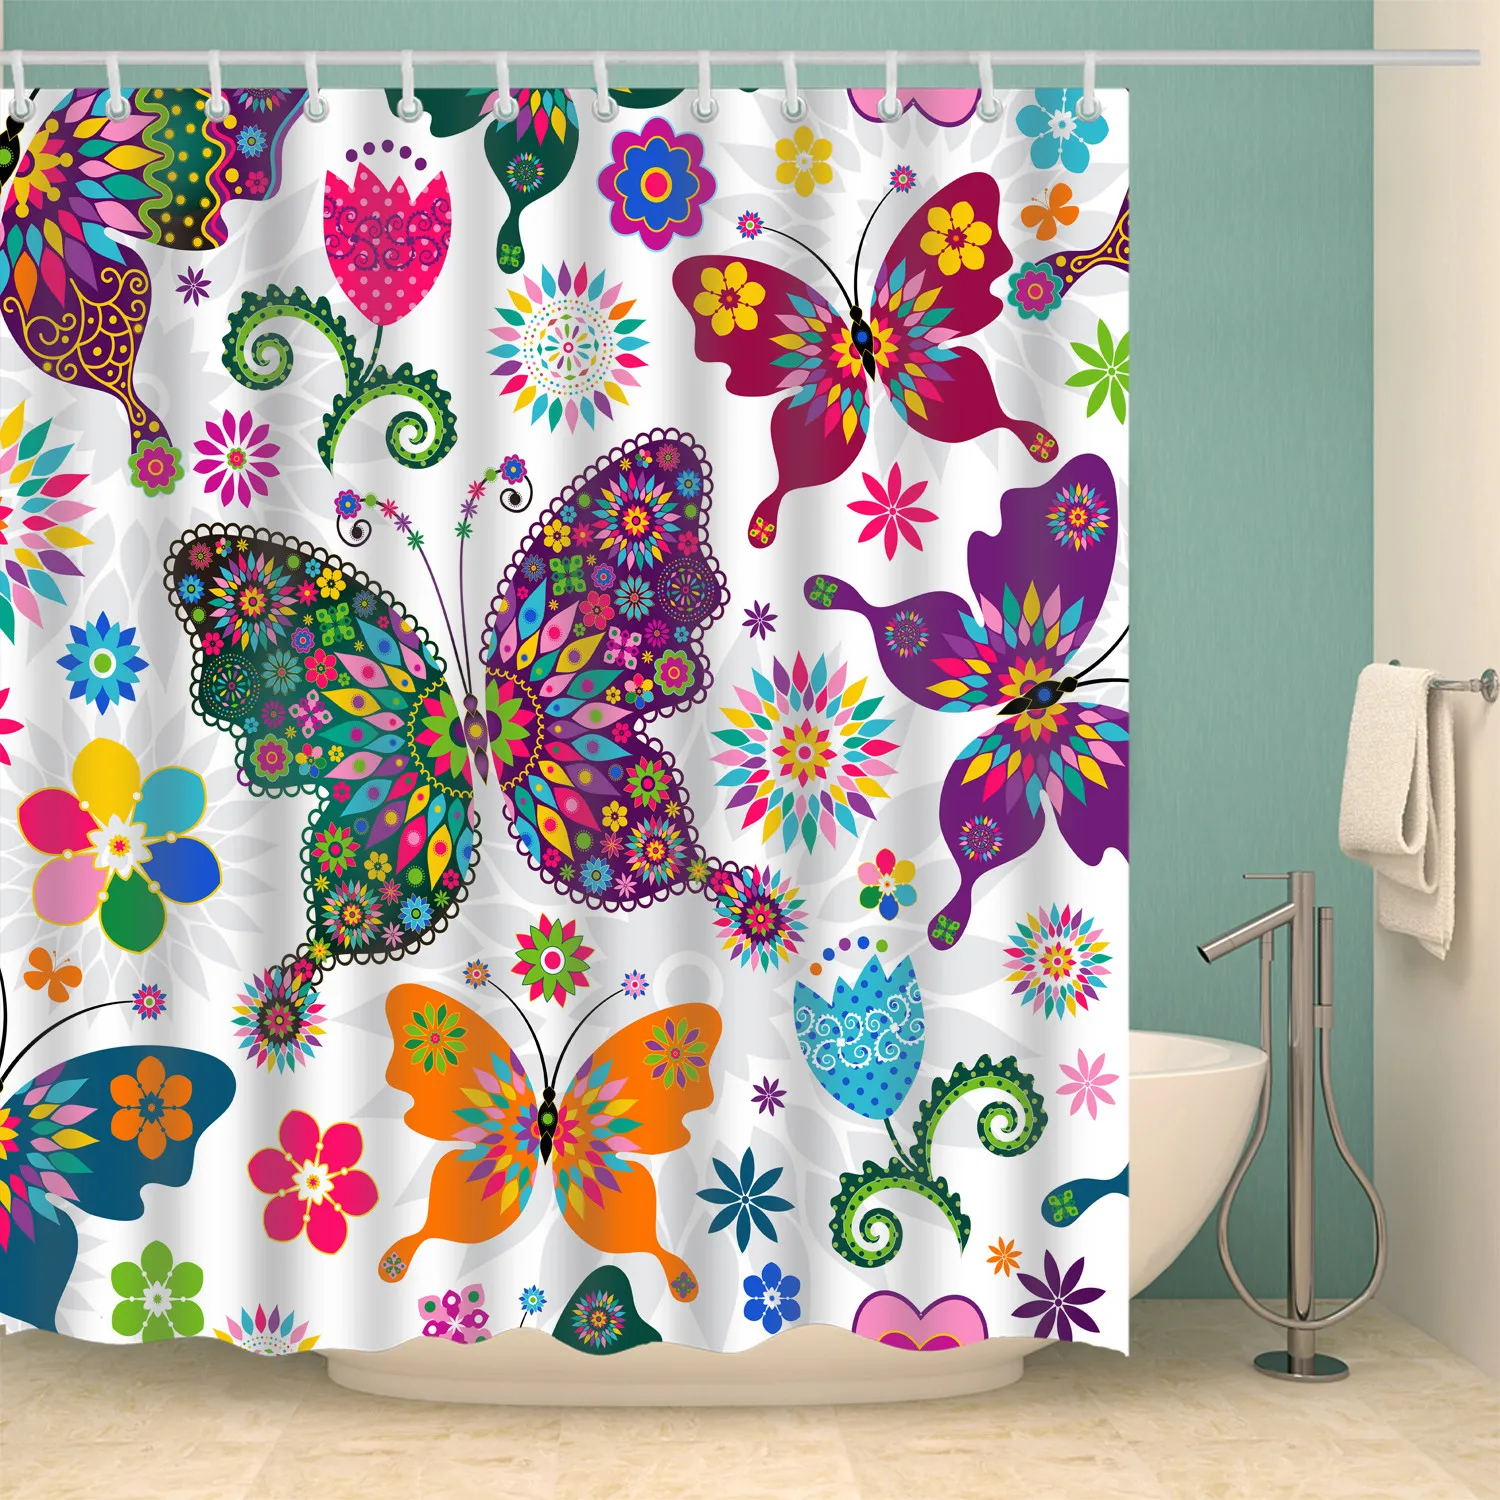 Washable Cute Sweet print Shower curtain waterproof 3D polyester fabric for bathroom curtain large 180x200cm cortinas